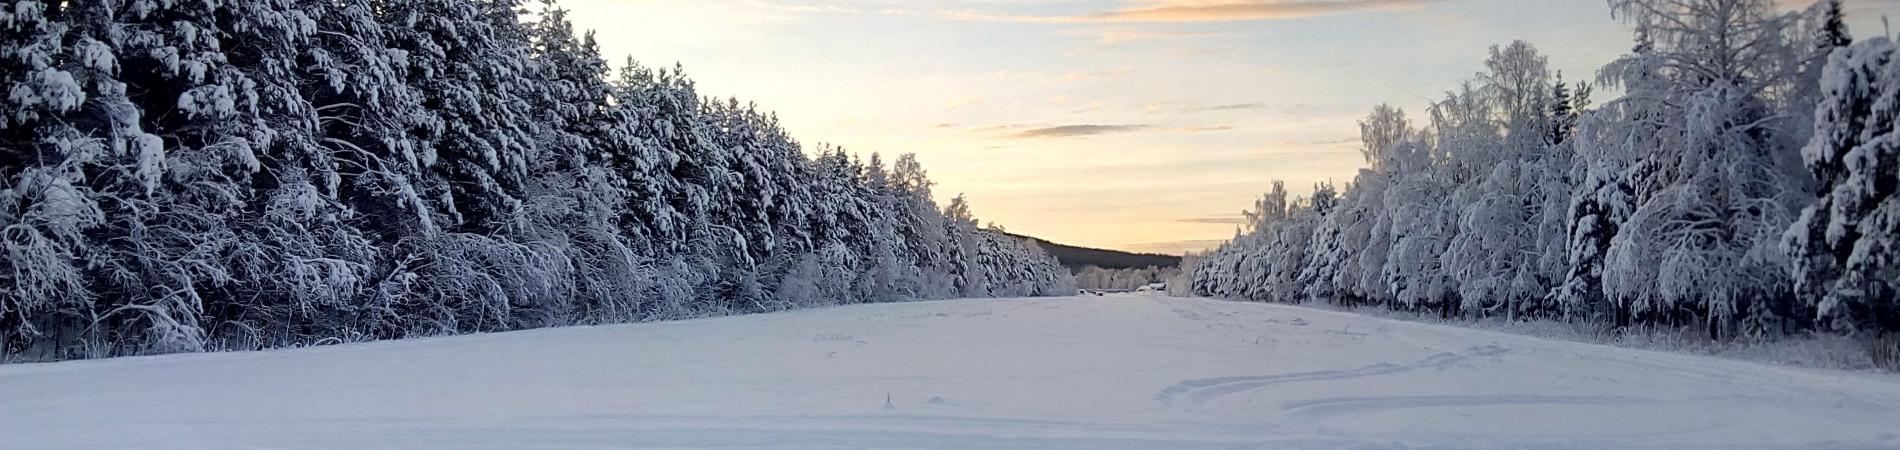 Image for Reasons to visit Finnish Lapland